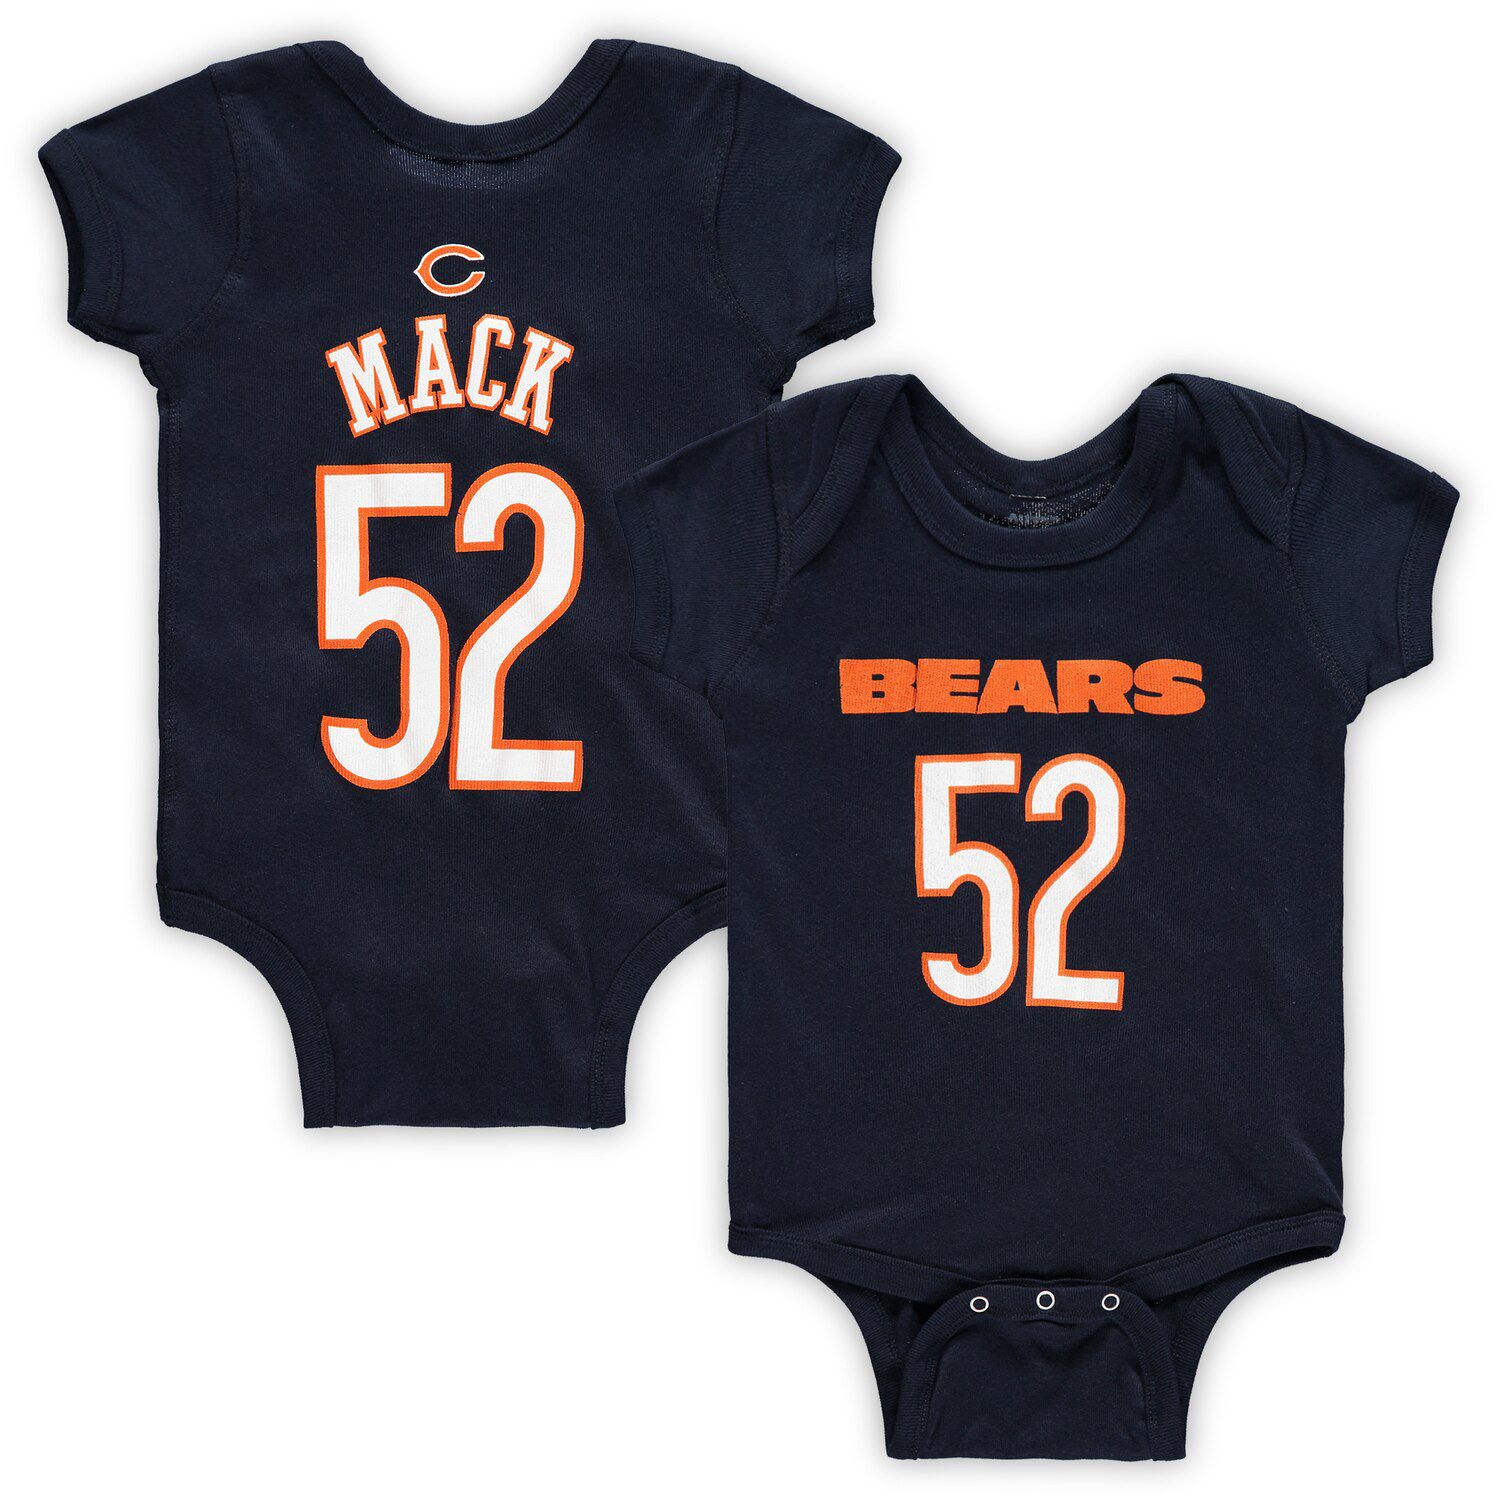 chicago bears baby jersey